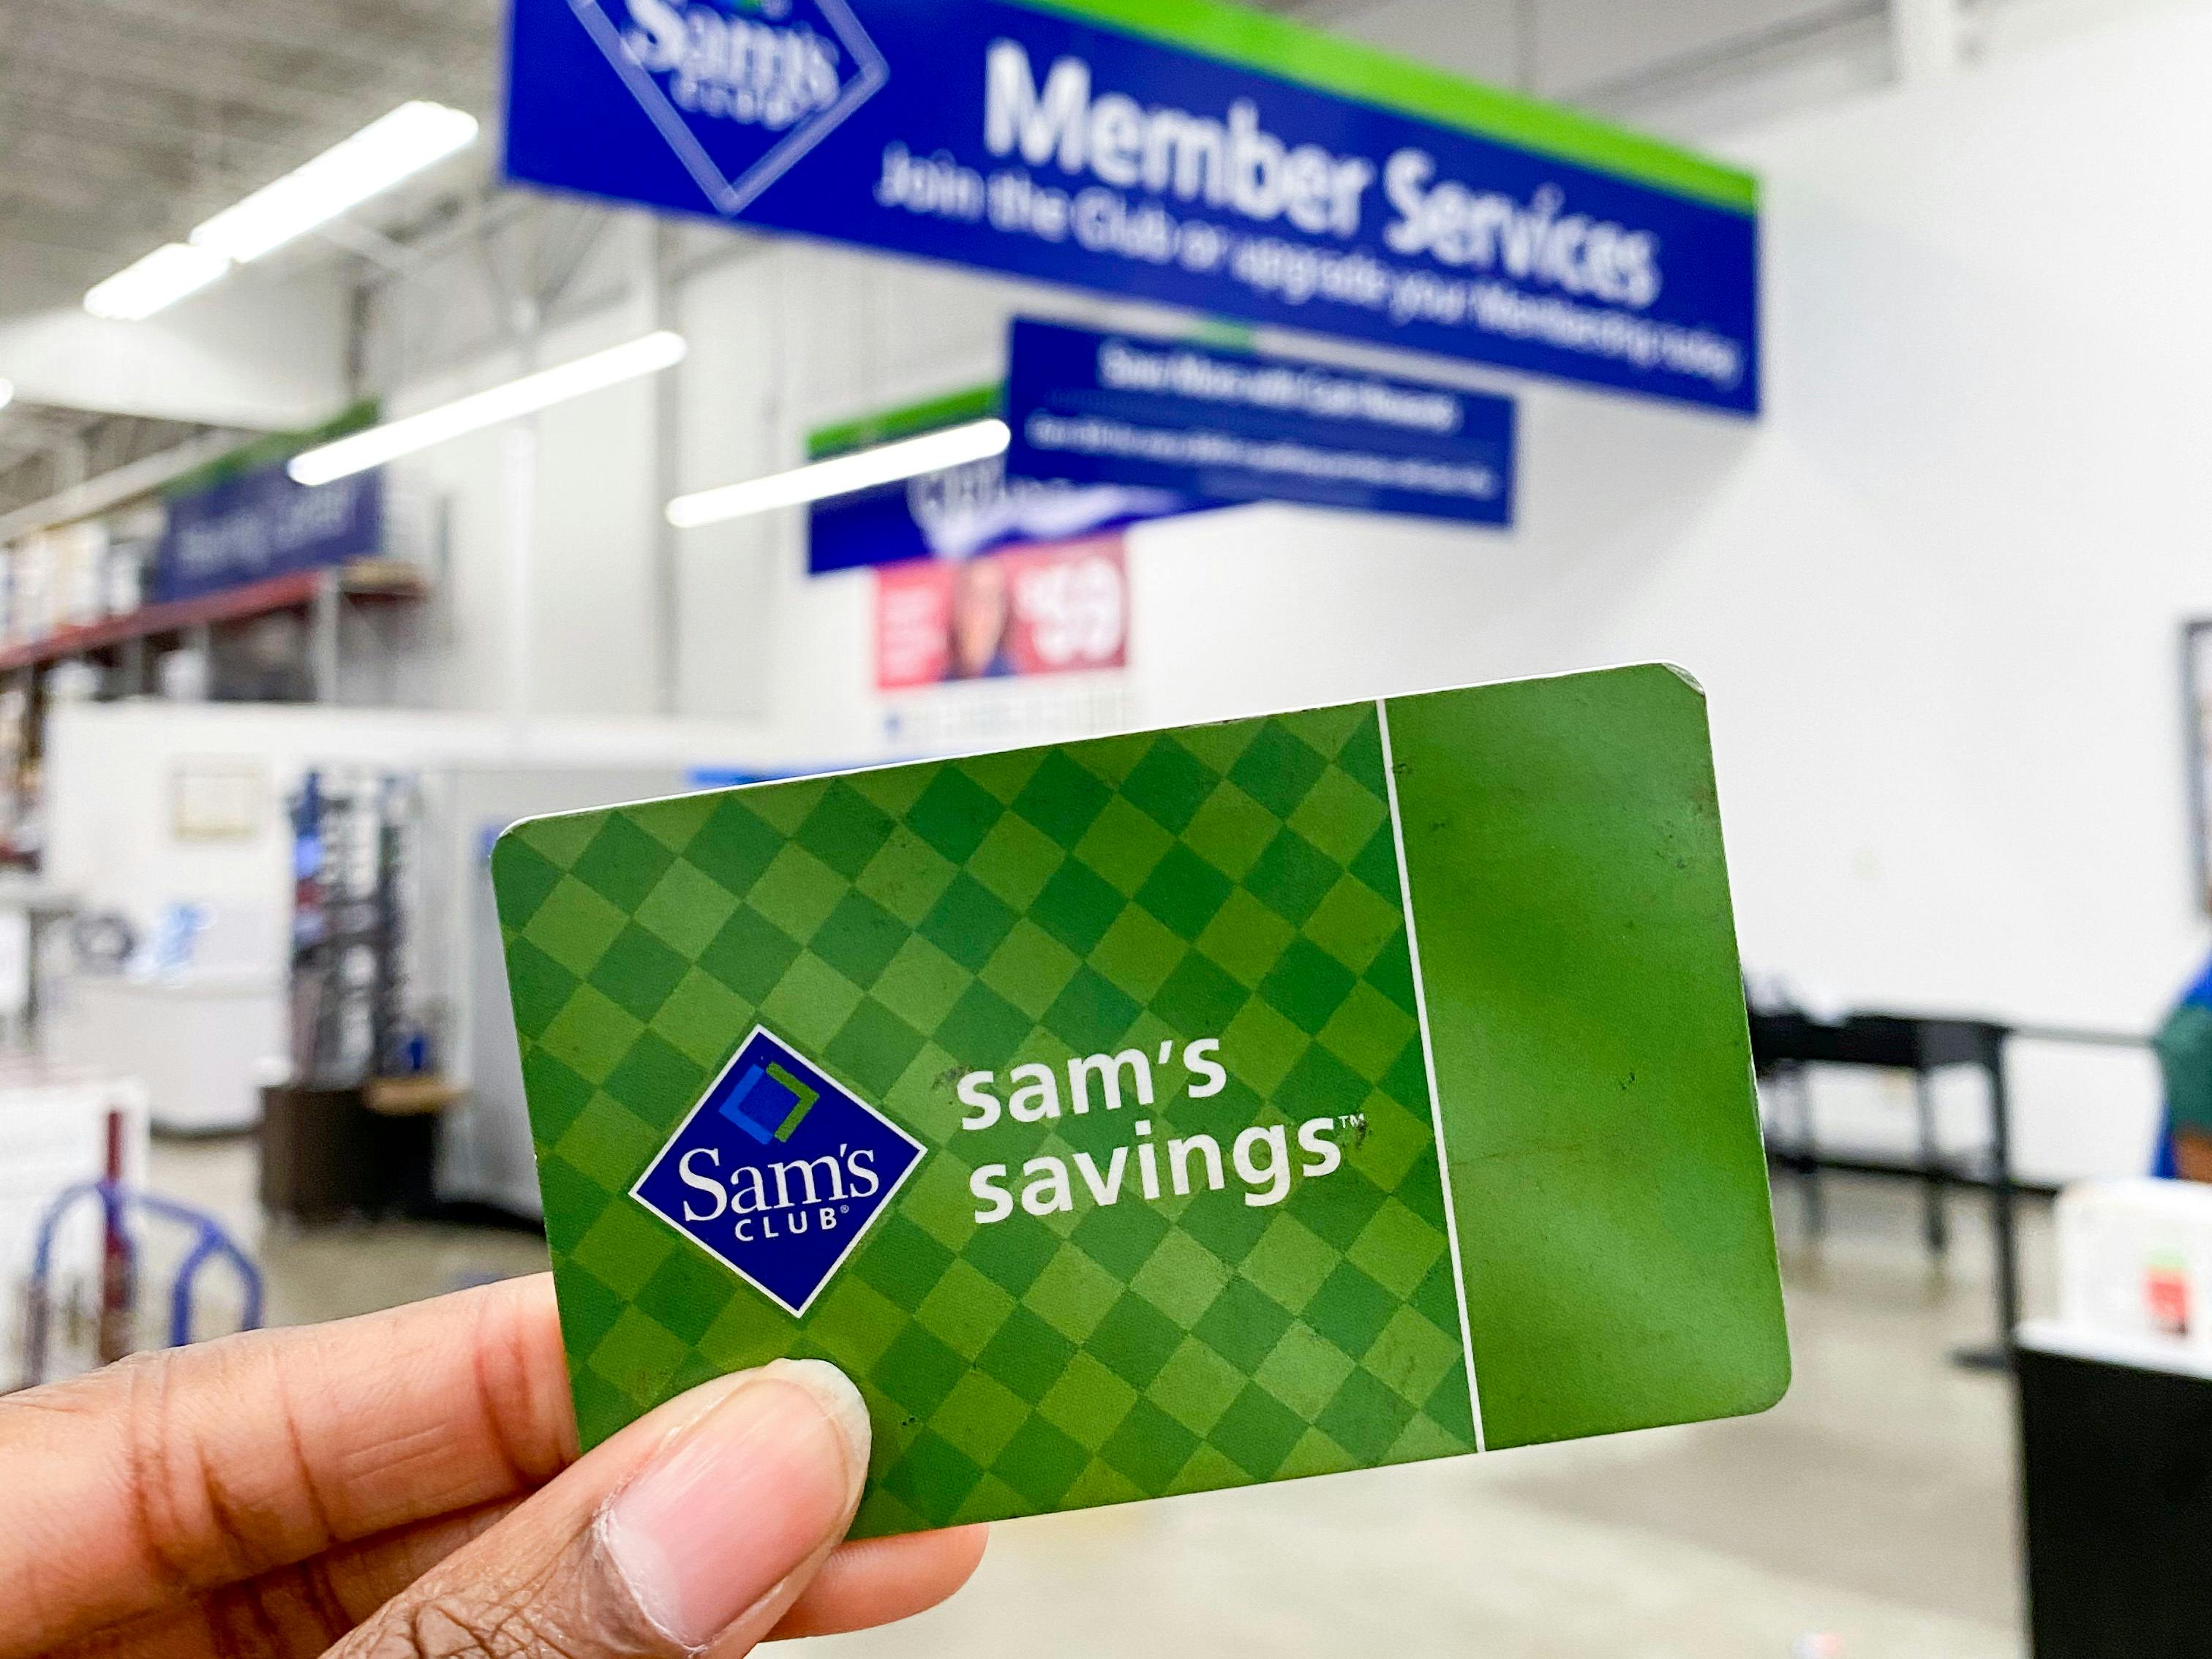 How to Get Sam's Club Trial Membership - The Krazy Coupon Lady